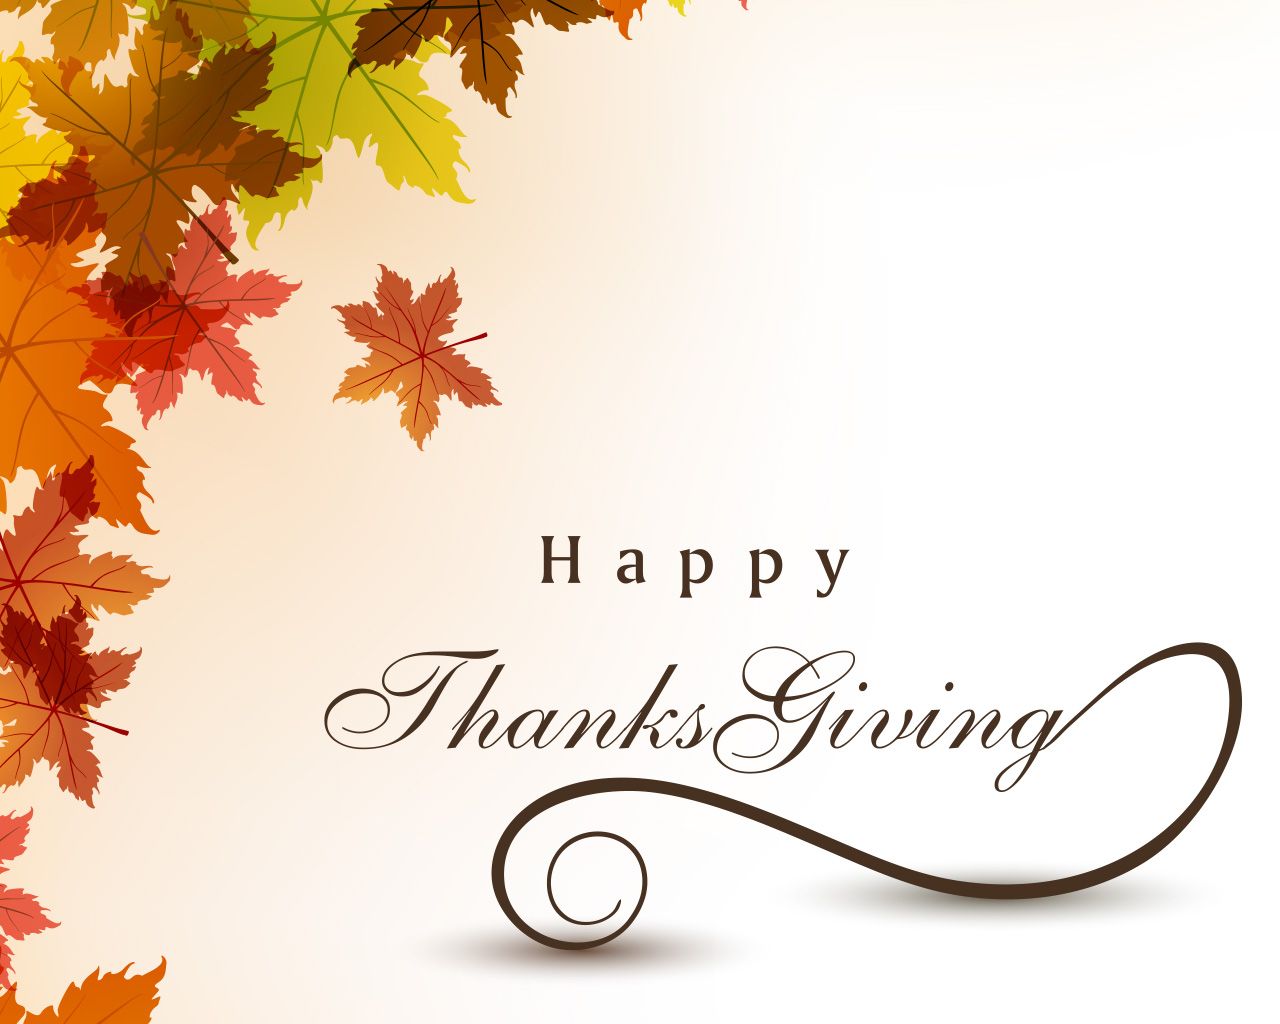 Latest Thanksgiving Wallpapers 2013 Online Magazine for